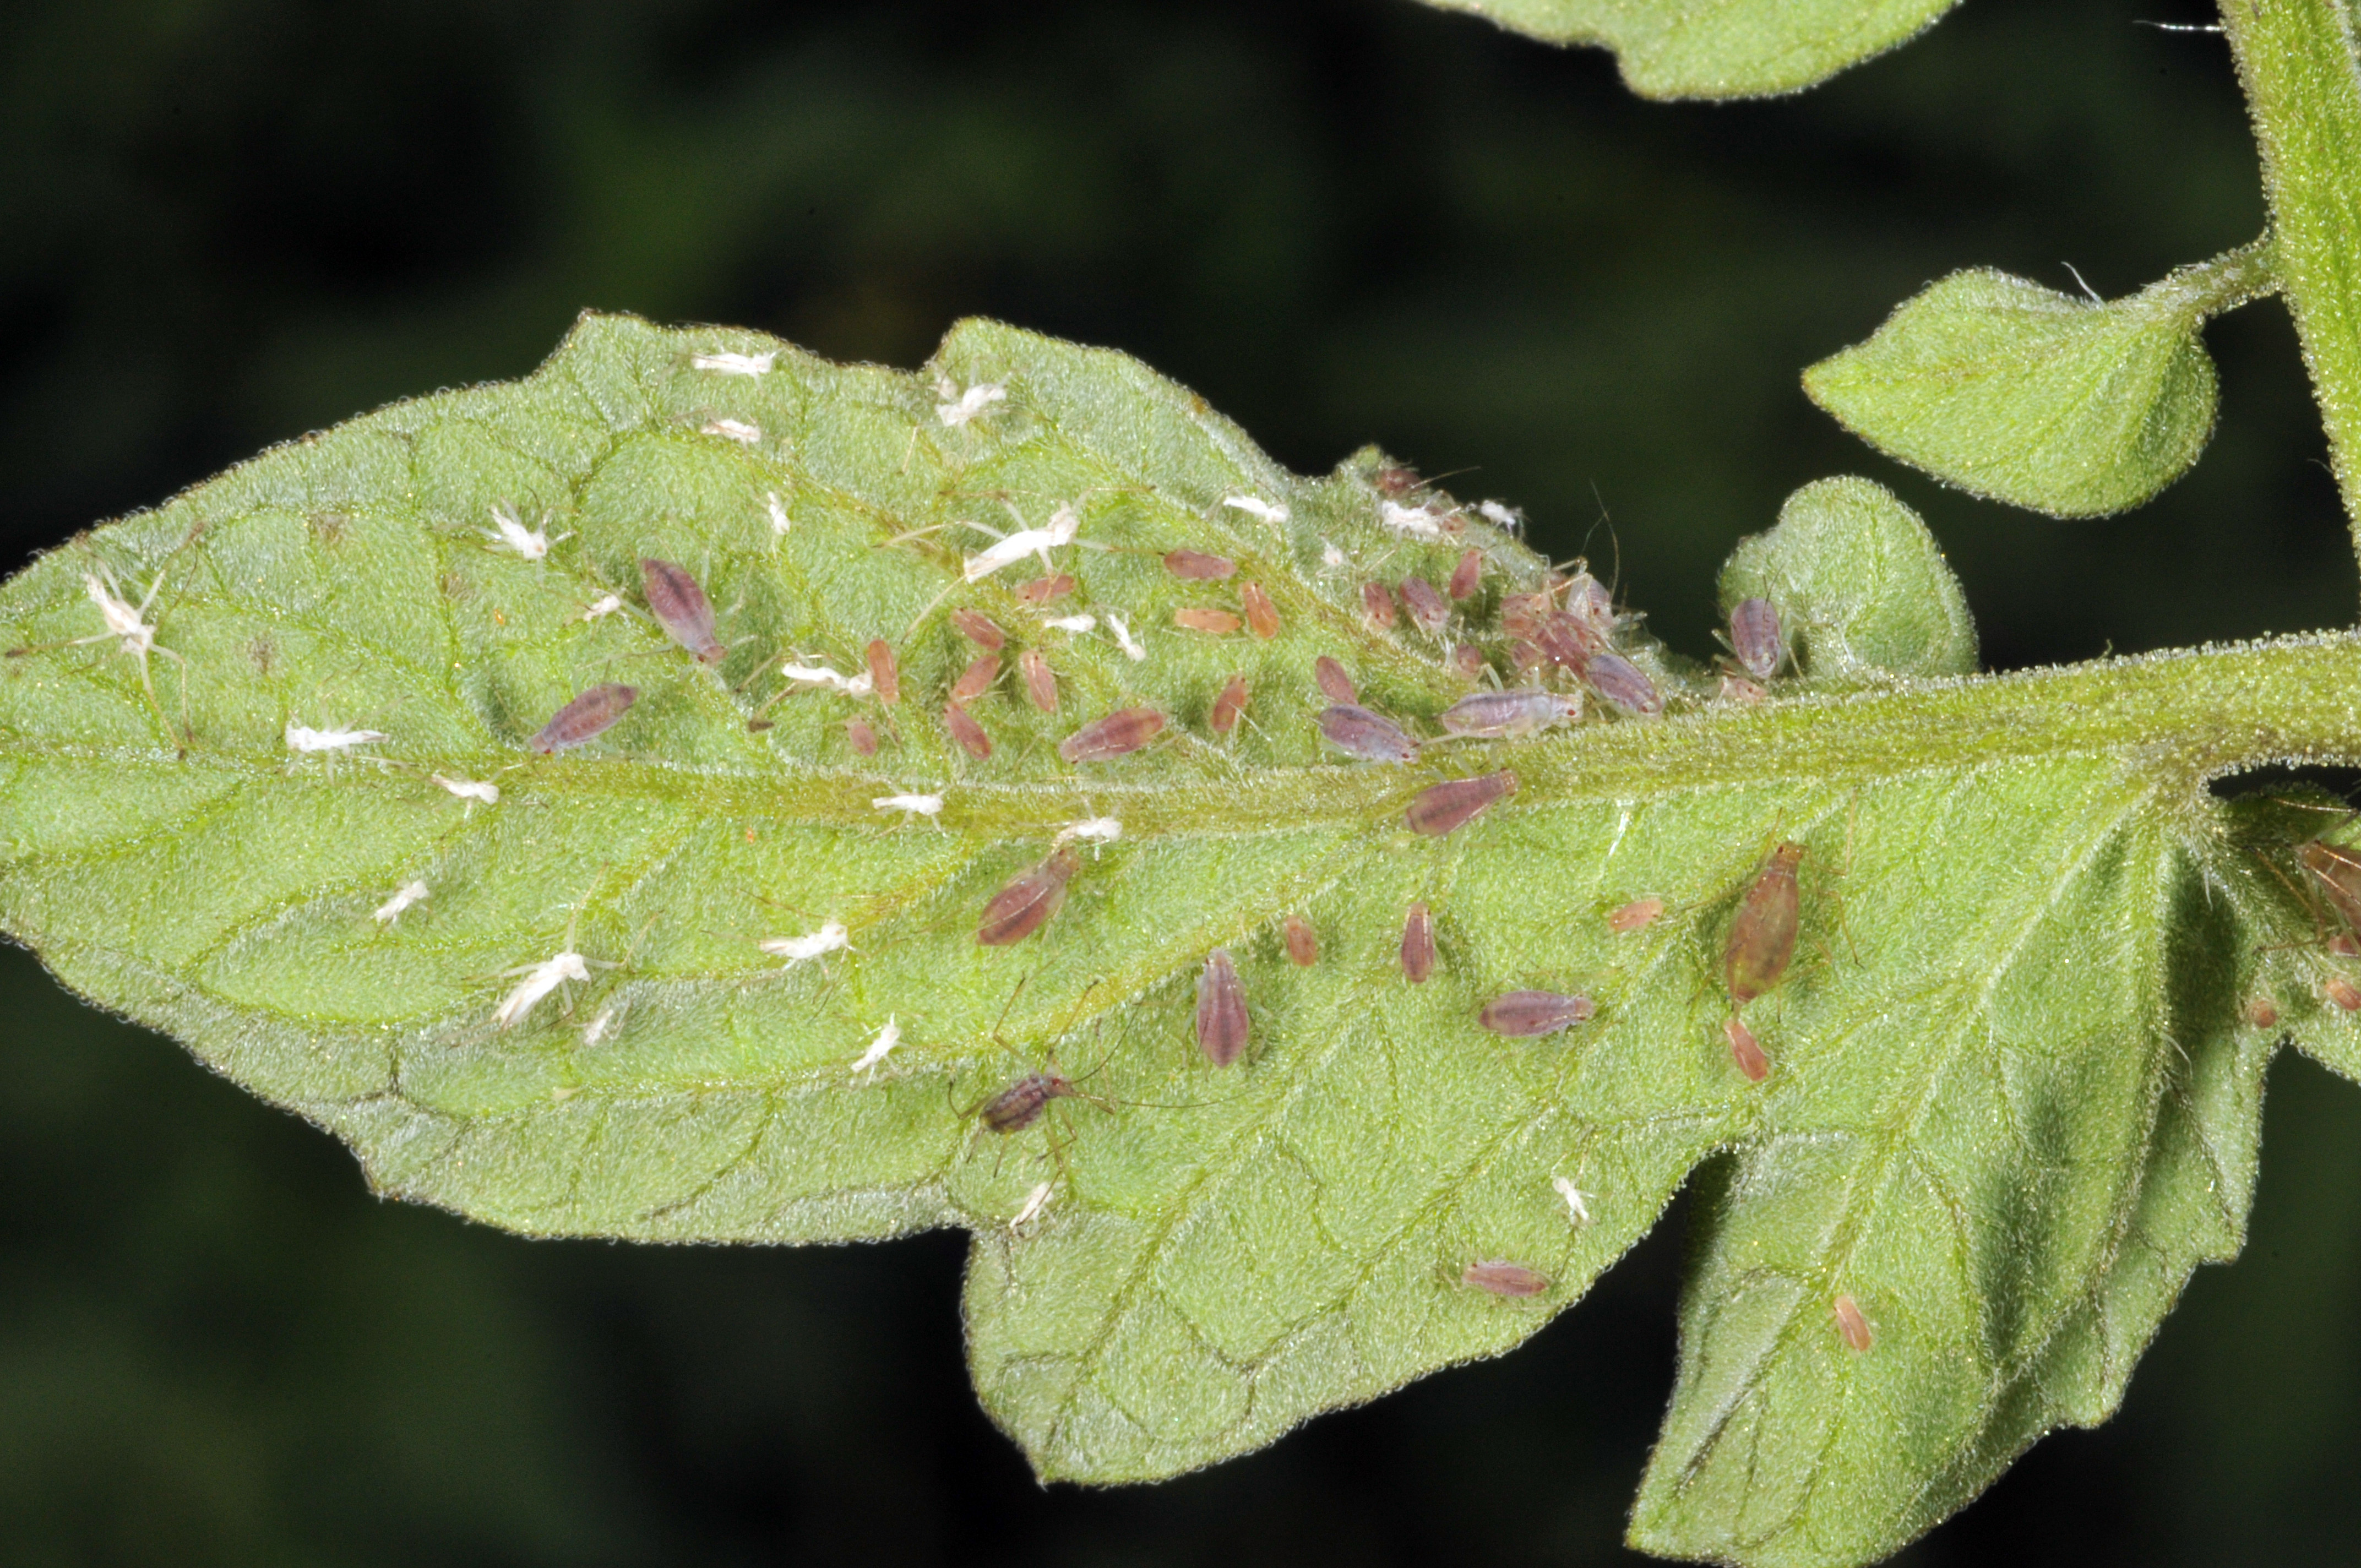 Aphids and cast skins on tomato leaf